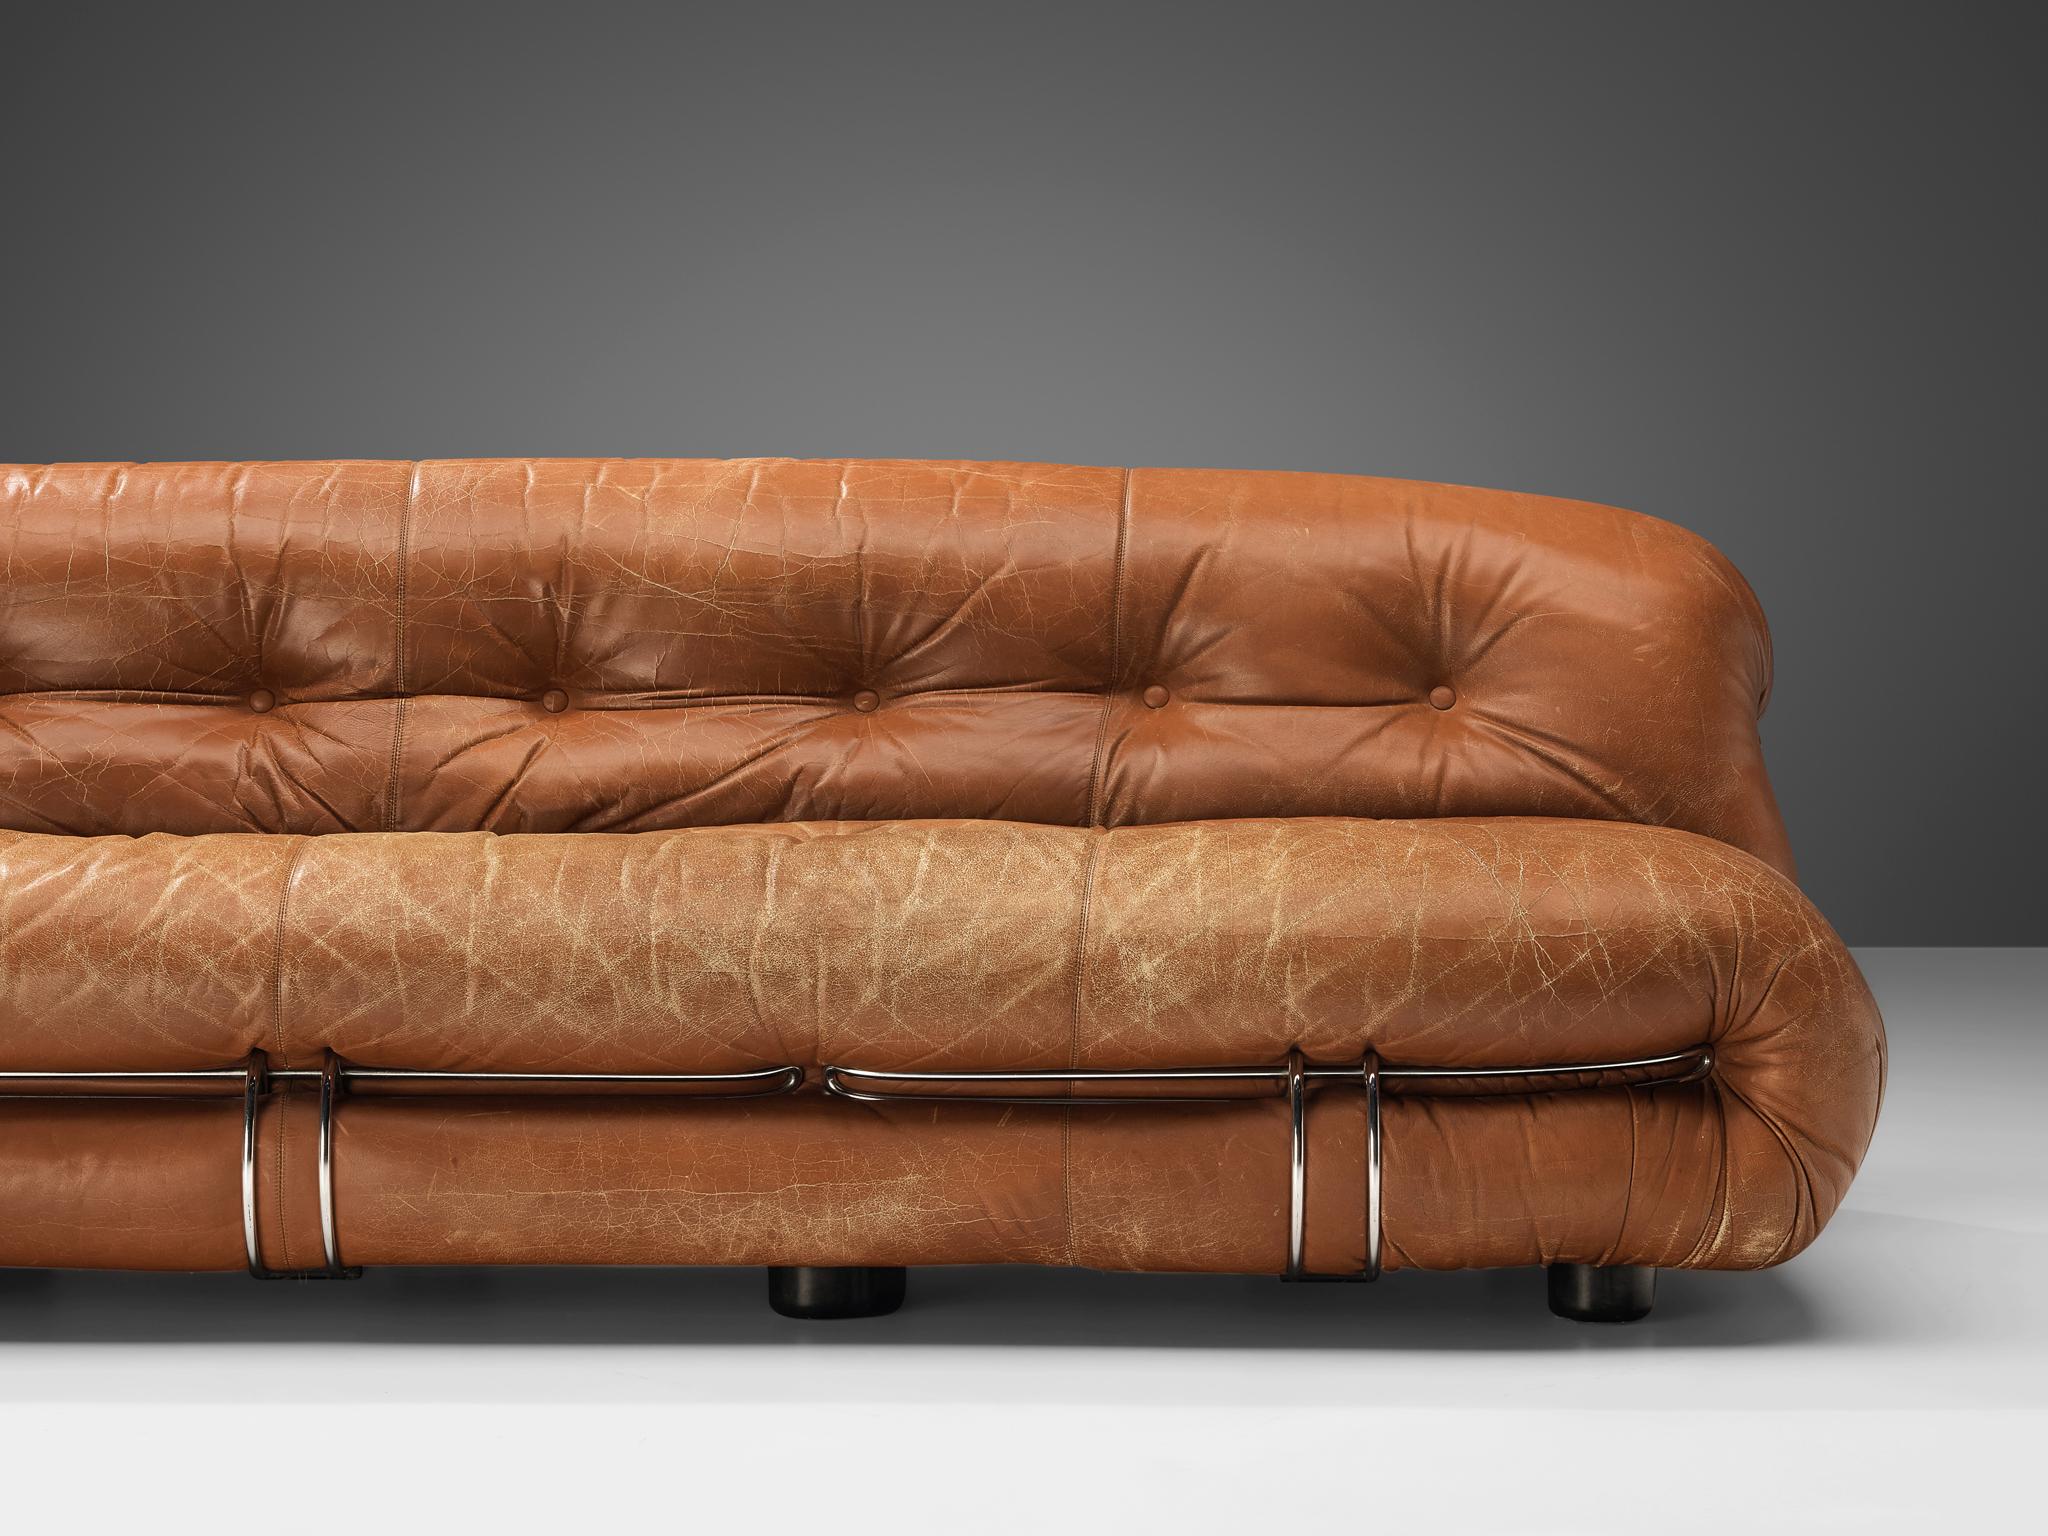 Afra & Tobia Scarpa for Cassina, 'Soriana' sofa, brown leather, metal, Italy, 1969

Iconic sofa by Italian designer couple Afra & Tobia Scarpa. The Soriana proposes a model that institutionalizes the image of the informal sitting where everything